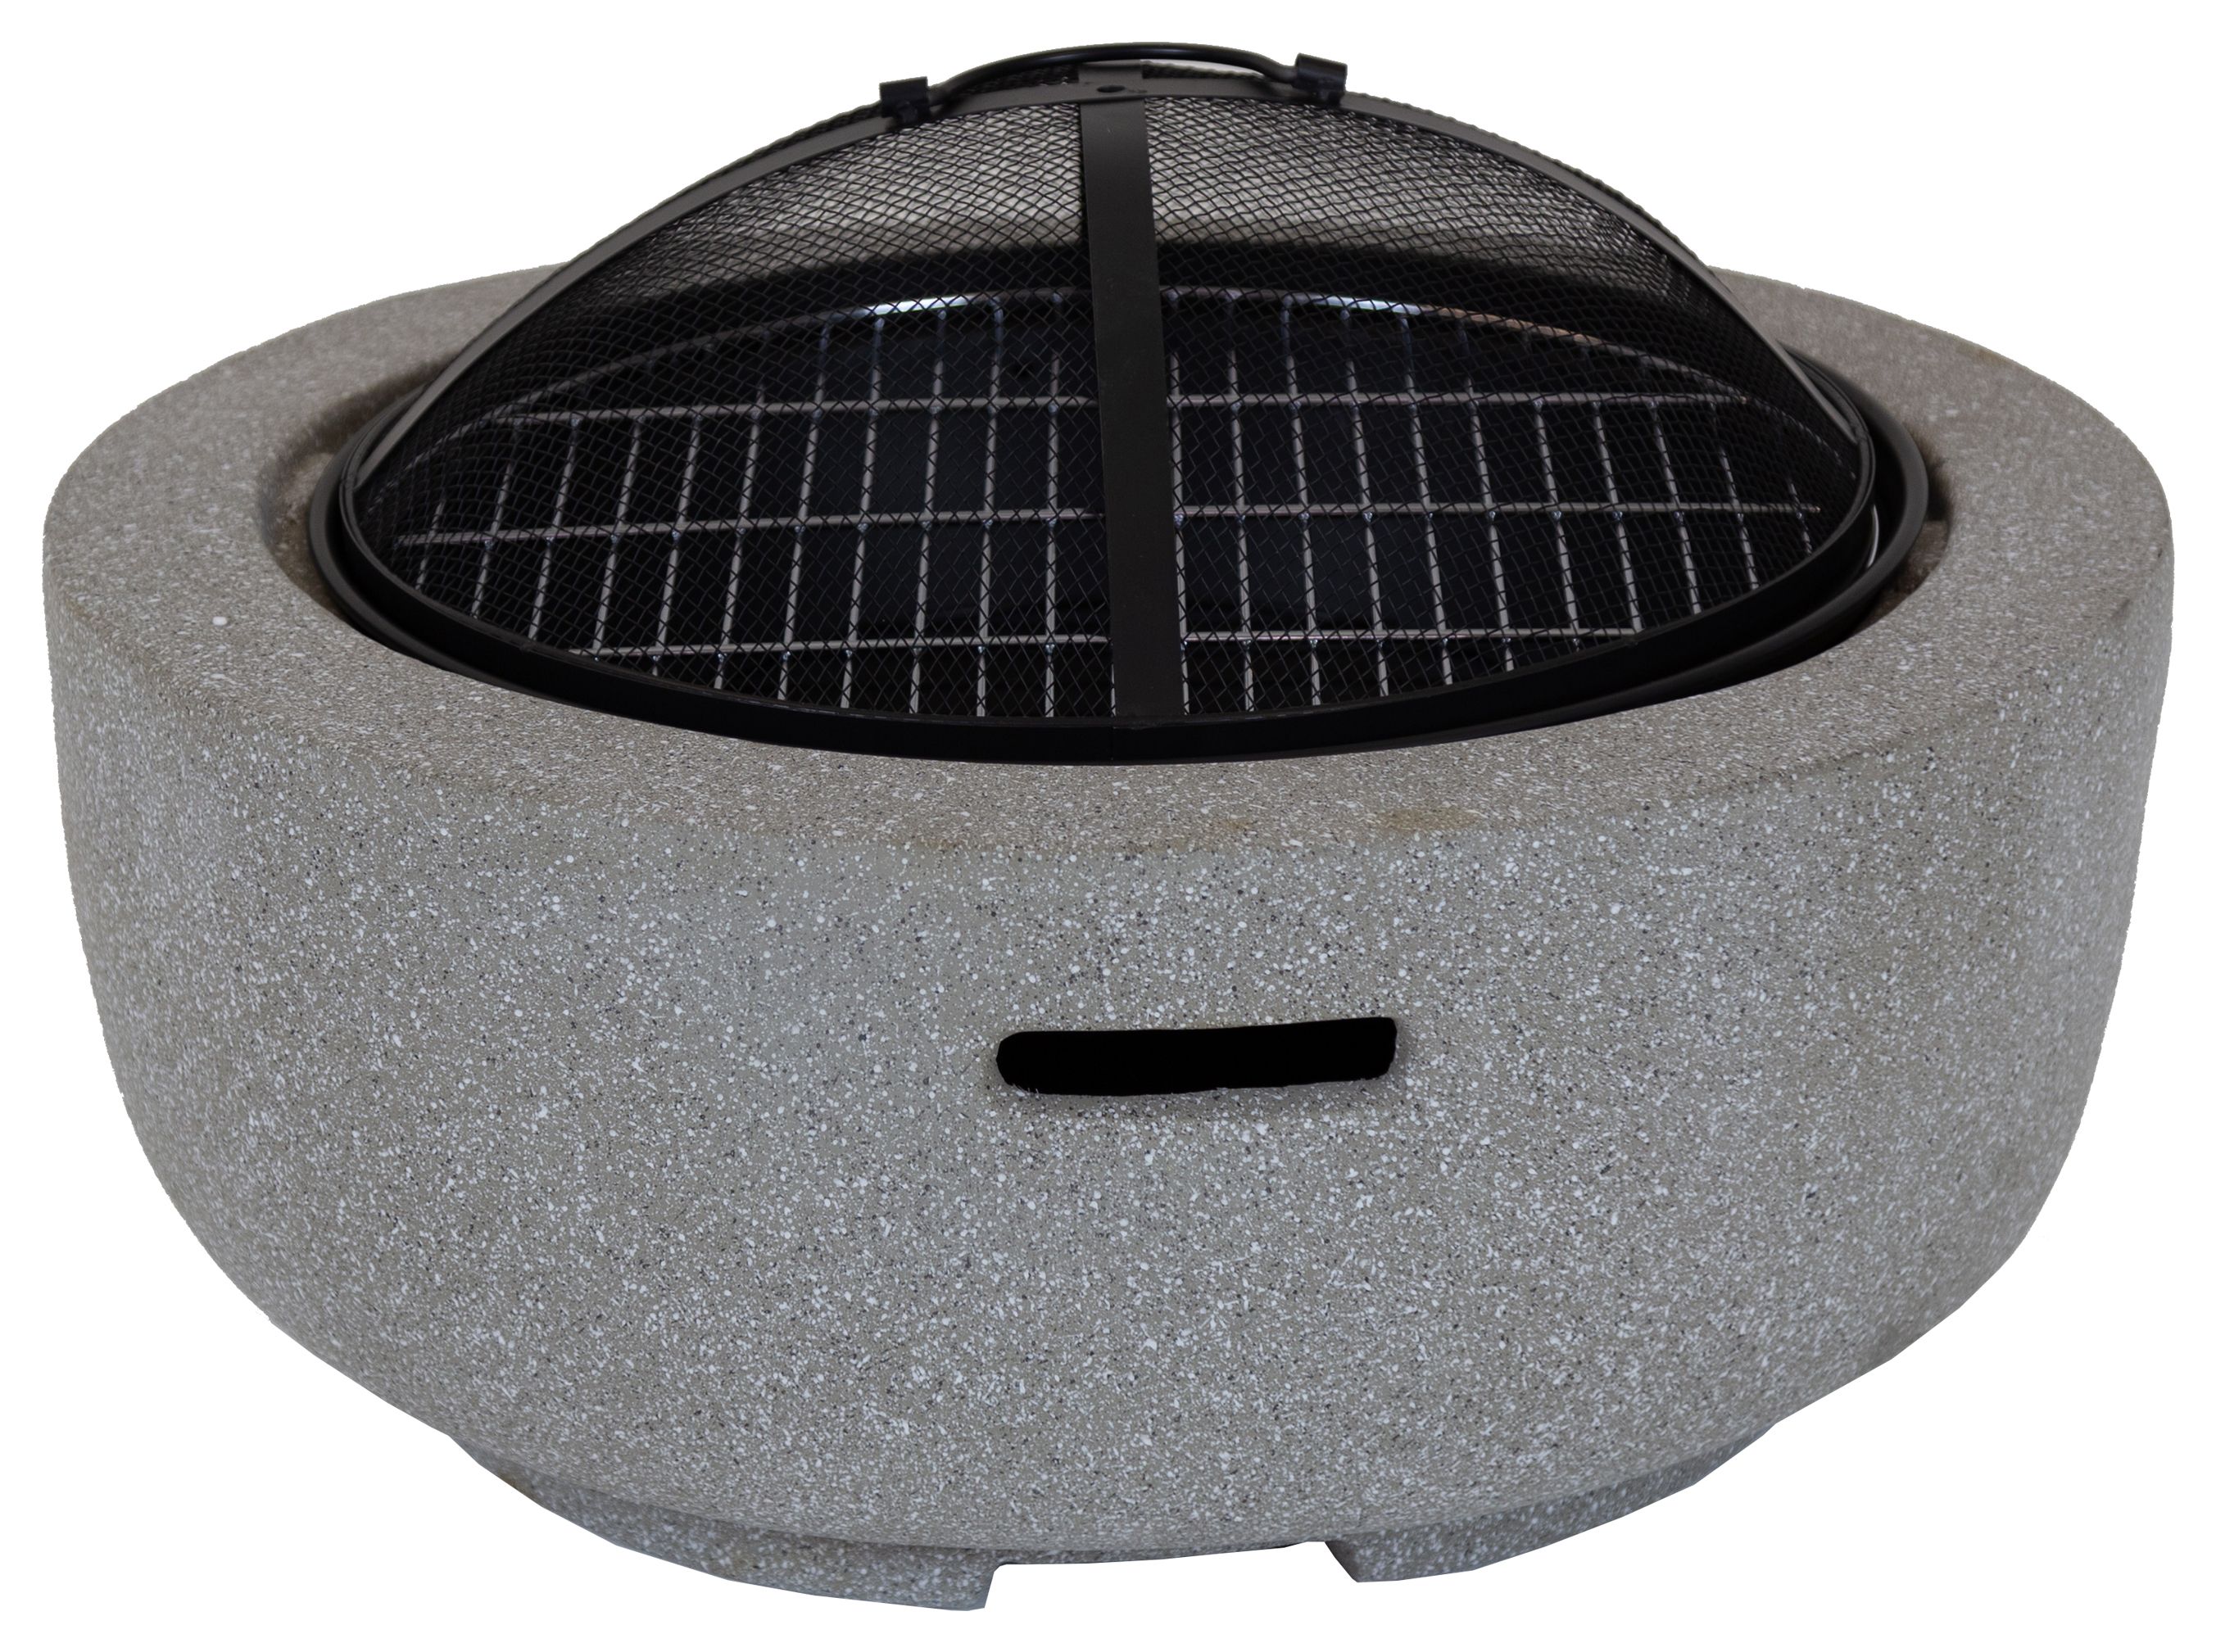 Charles Bentley 60cm Round Outdoor Fire Pit with Mesh Cover - Magnesia